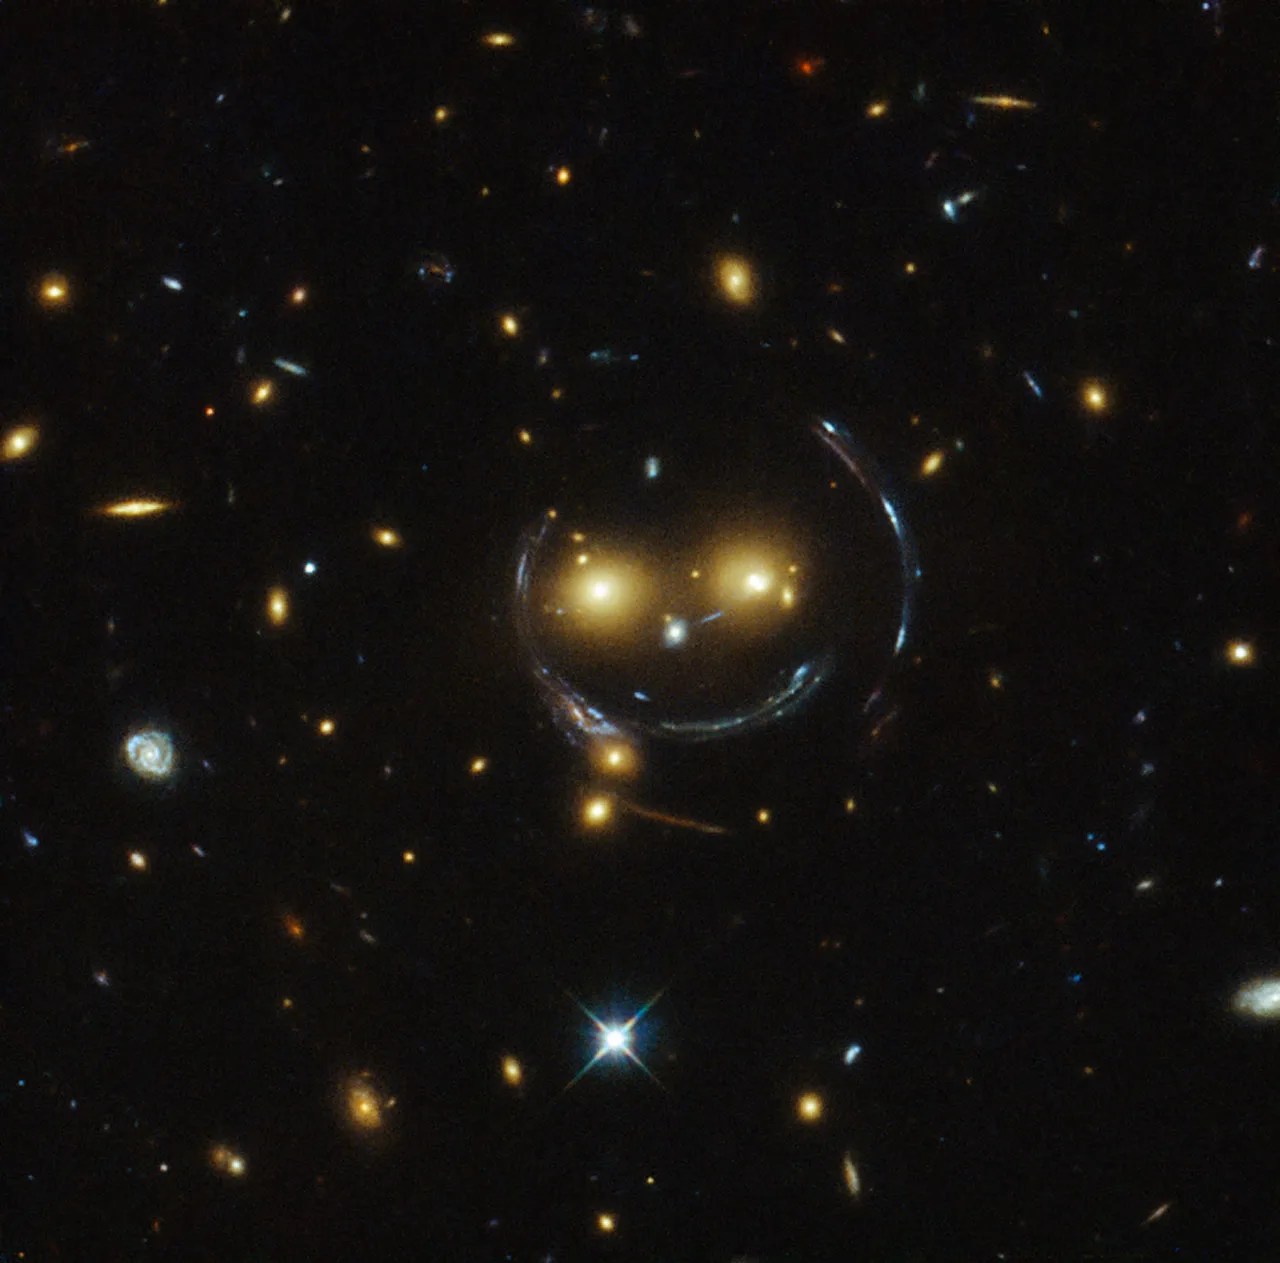 Image, taken with the nasa/esa hubble space telescope, is the galaxy cluster sdss j1038+4849